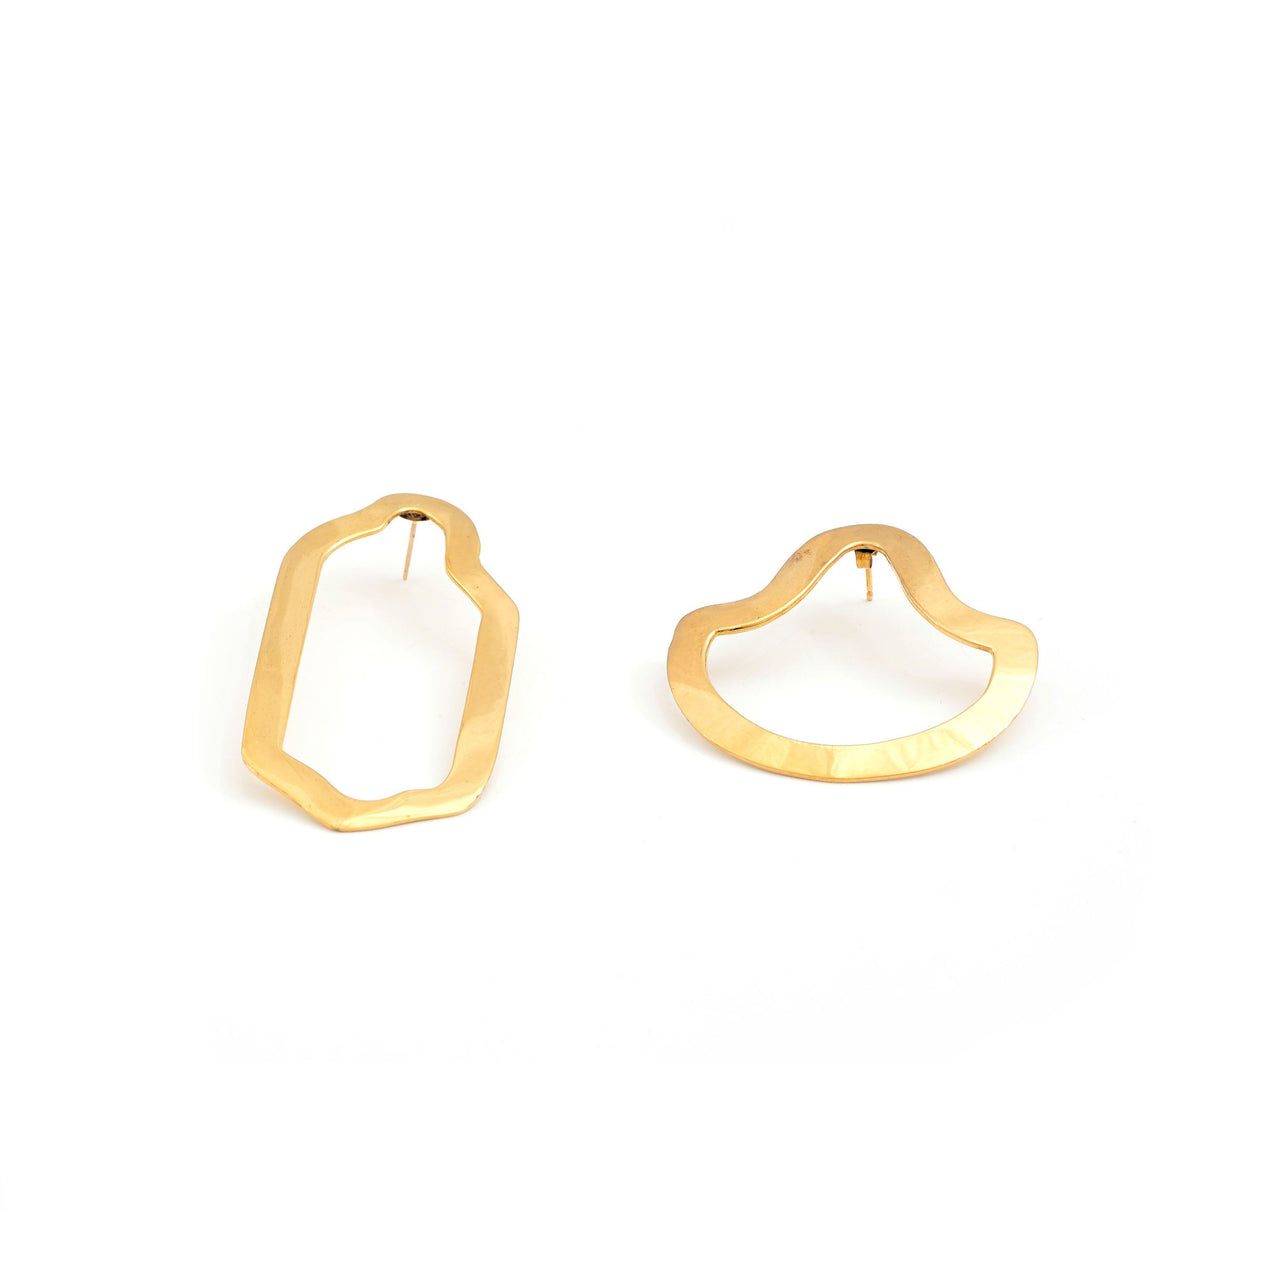 Negative Space Puzzle Earrings - Gold